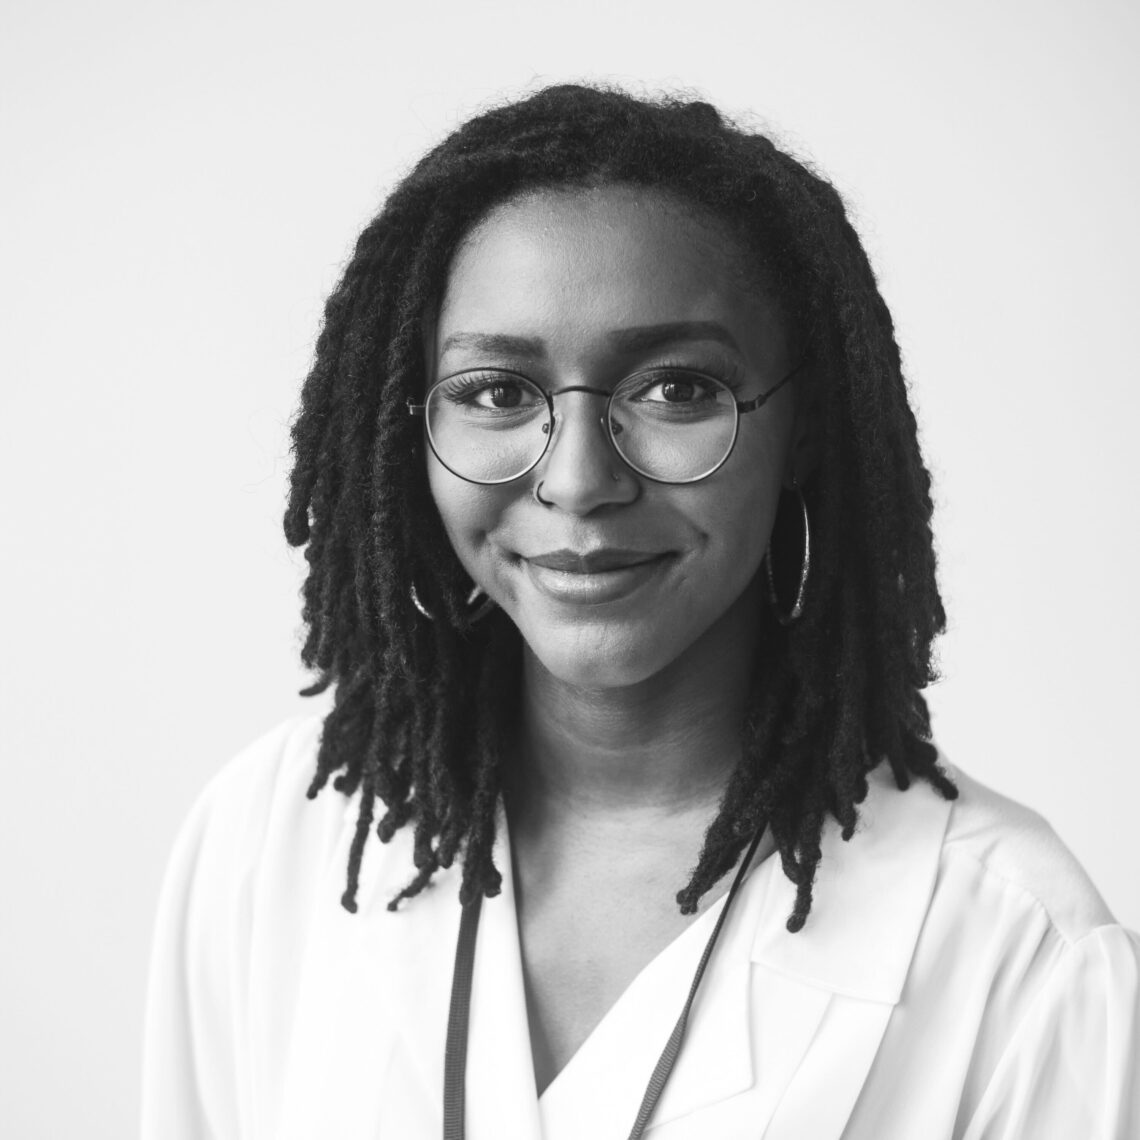 Black and white photo of producer Bria Suggs wearing glasses and a white jacket.